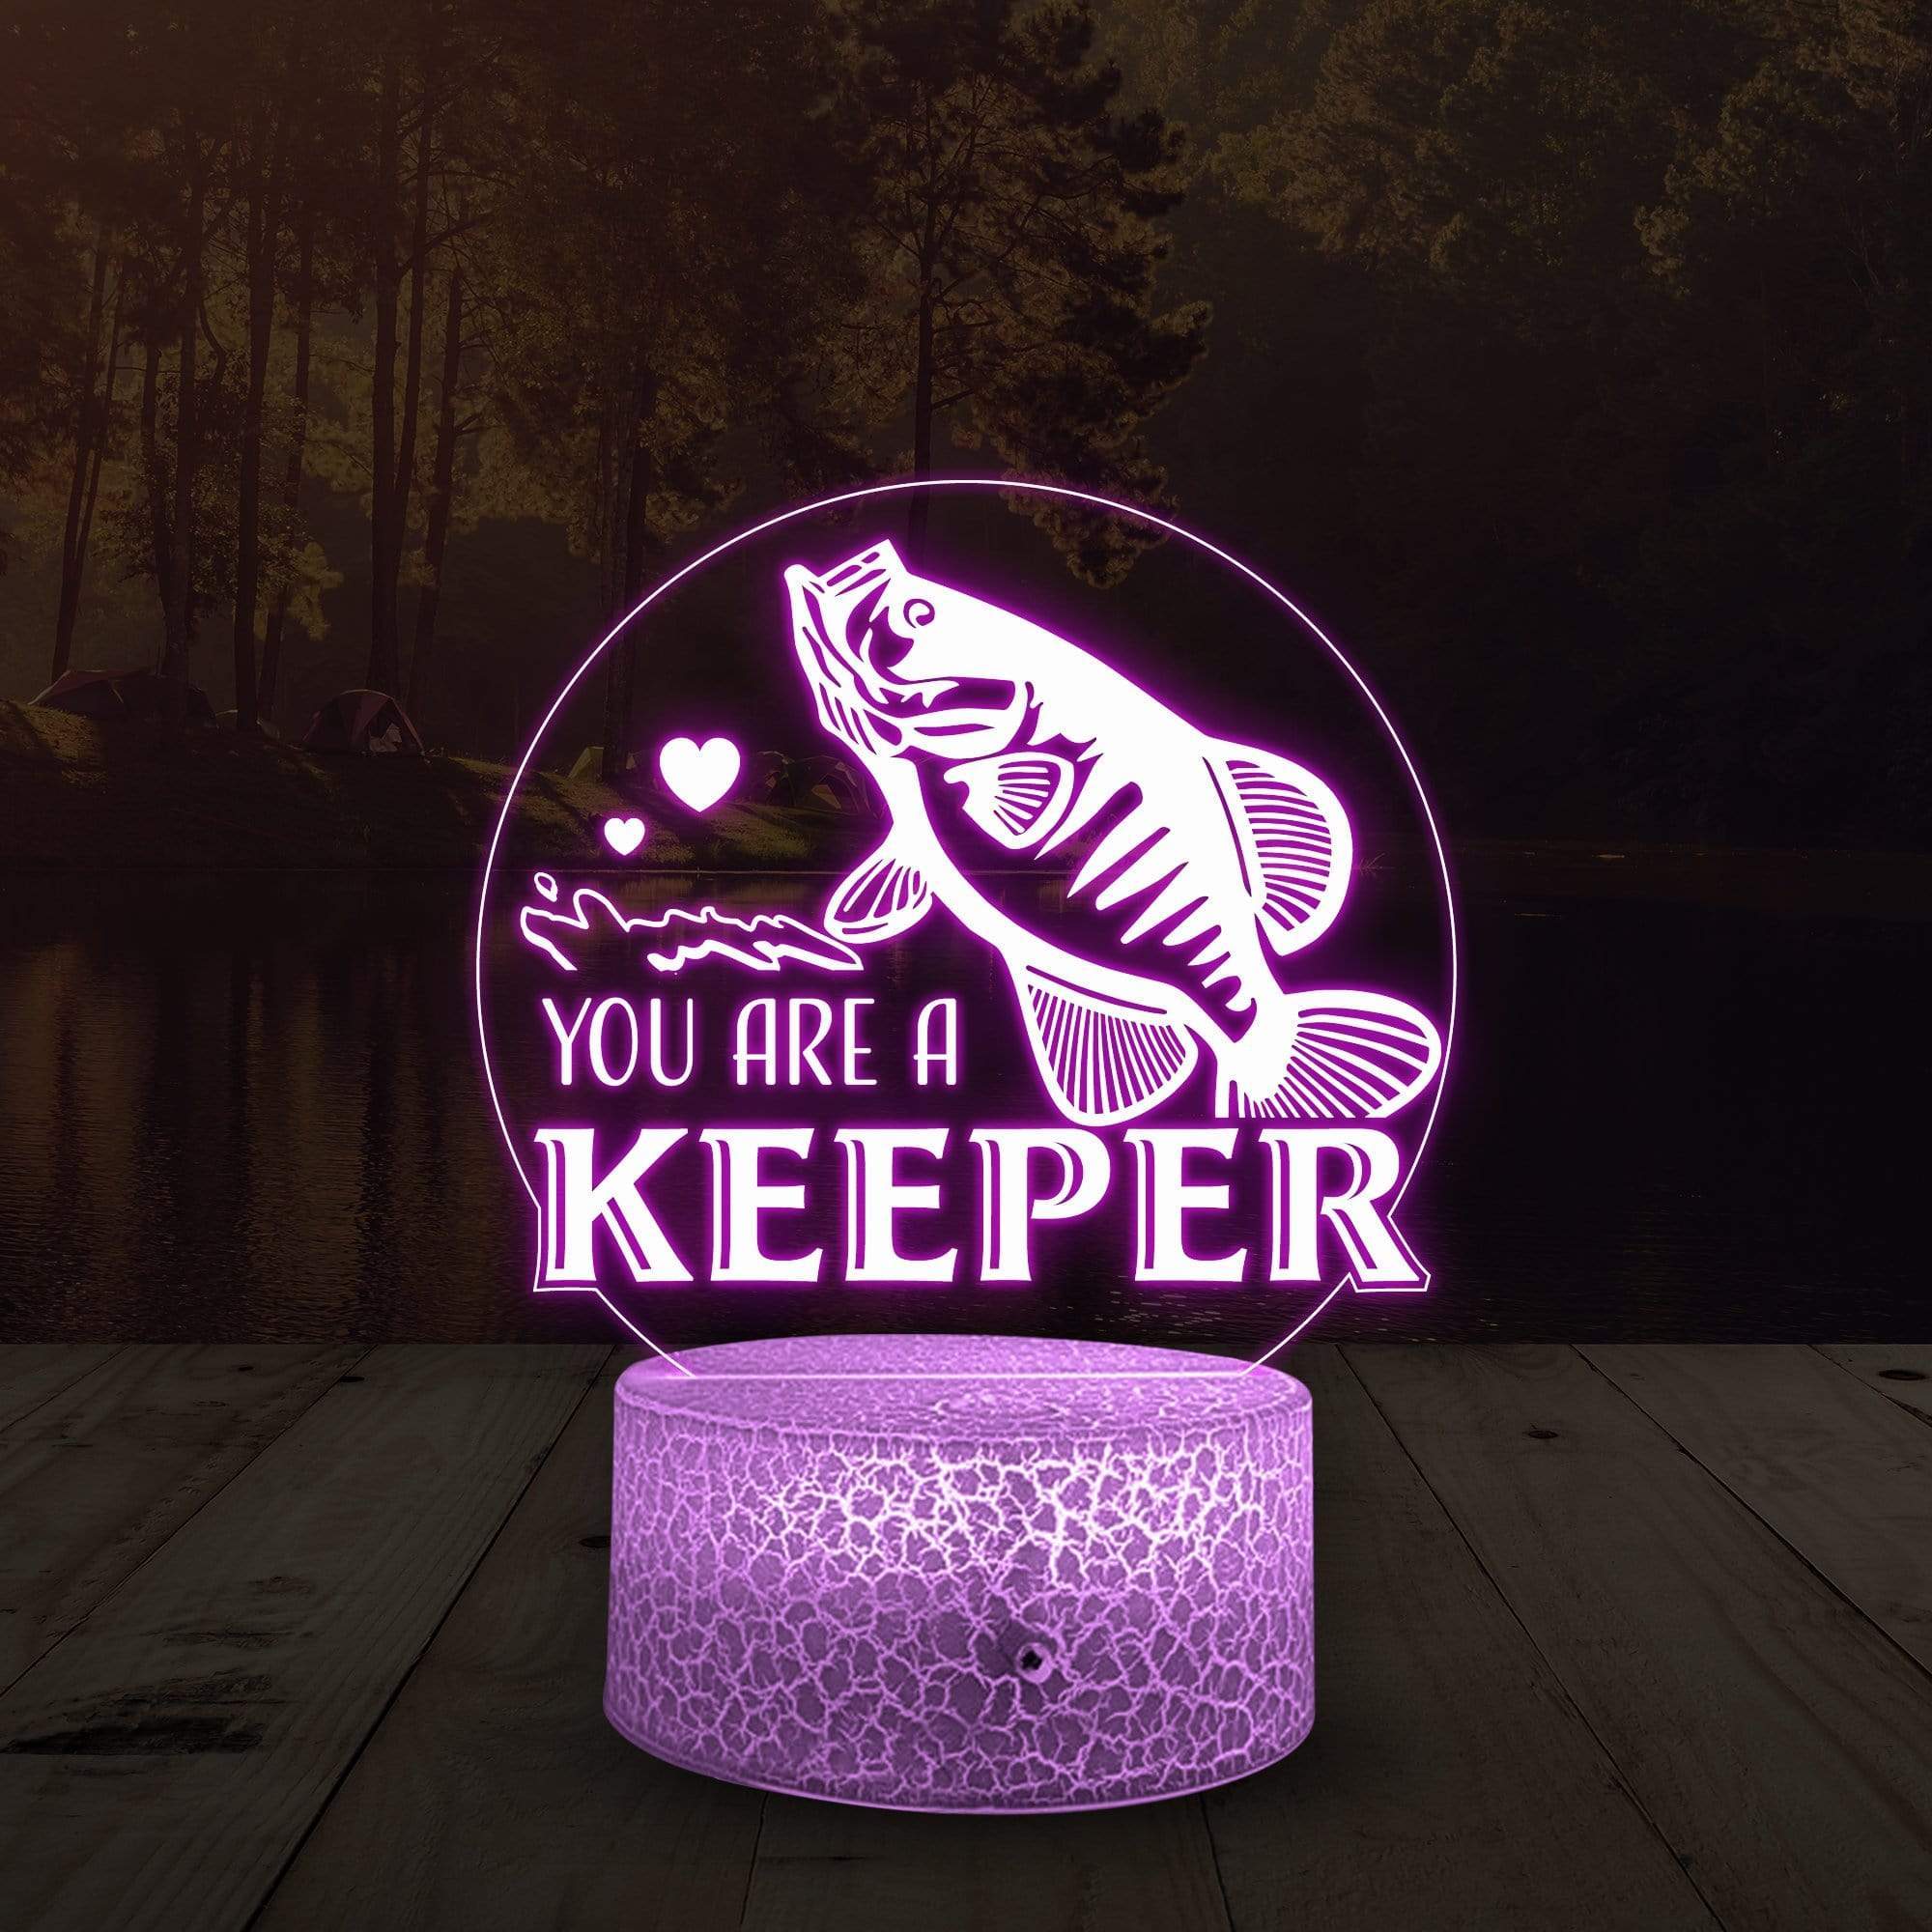 Crappie Fish Led Light - Crappie Fishing Gift - To My Man - You Are